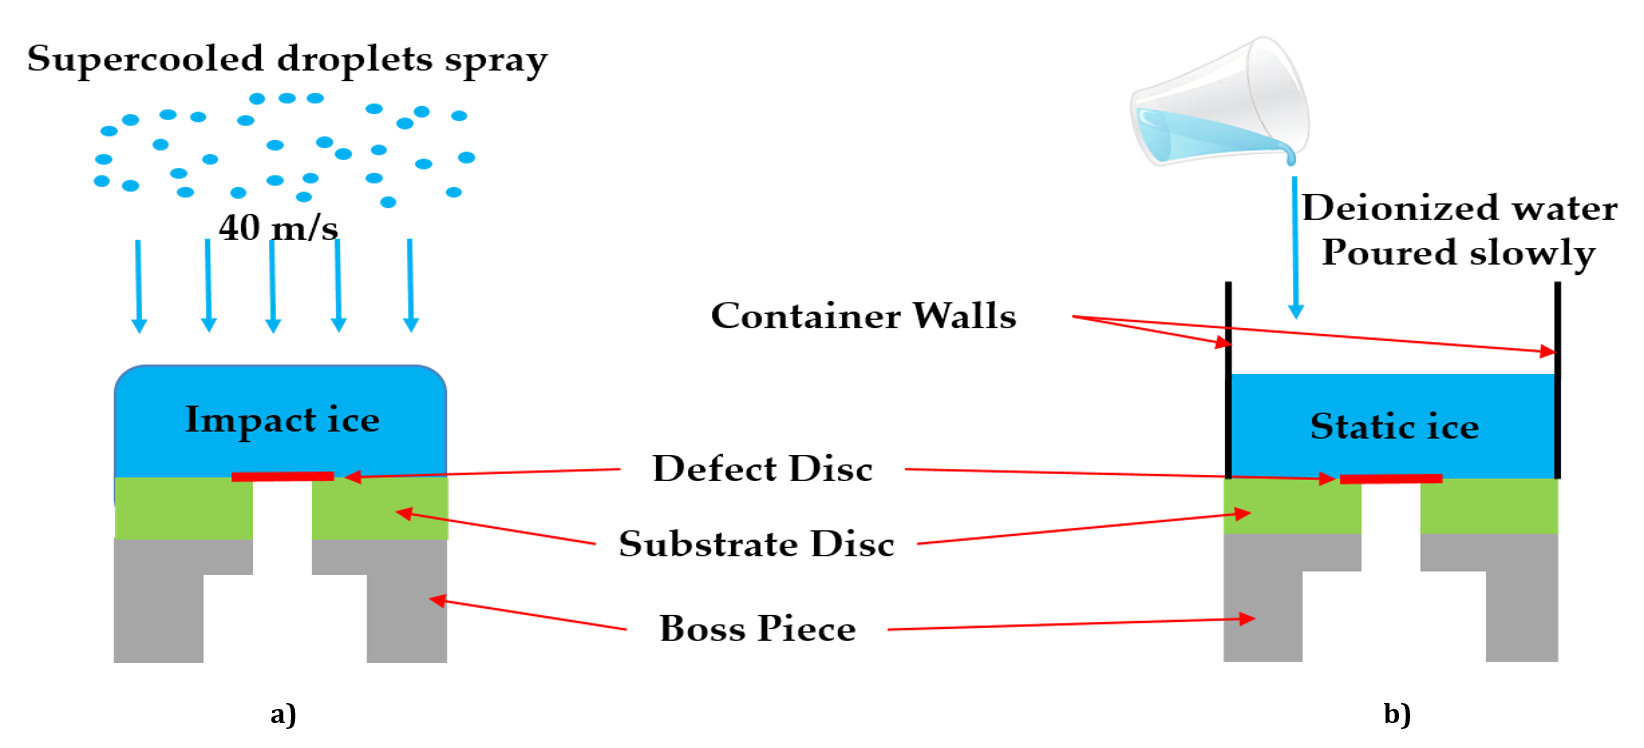 Schematic describing at temperatures below freezing accretion of a) impact ice, and b) static ice